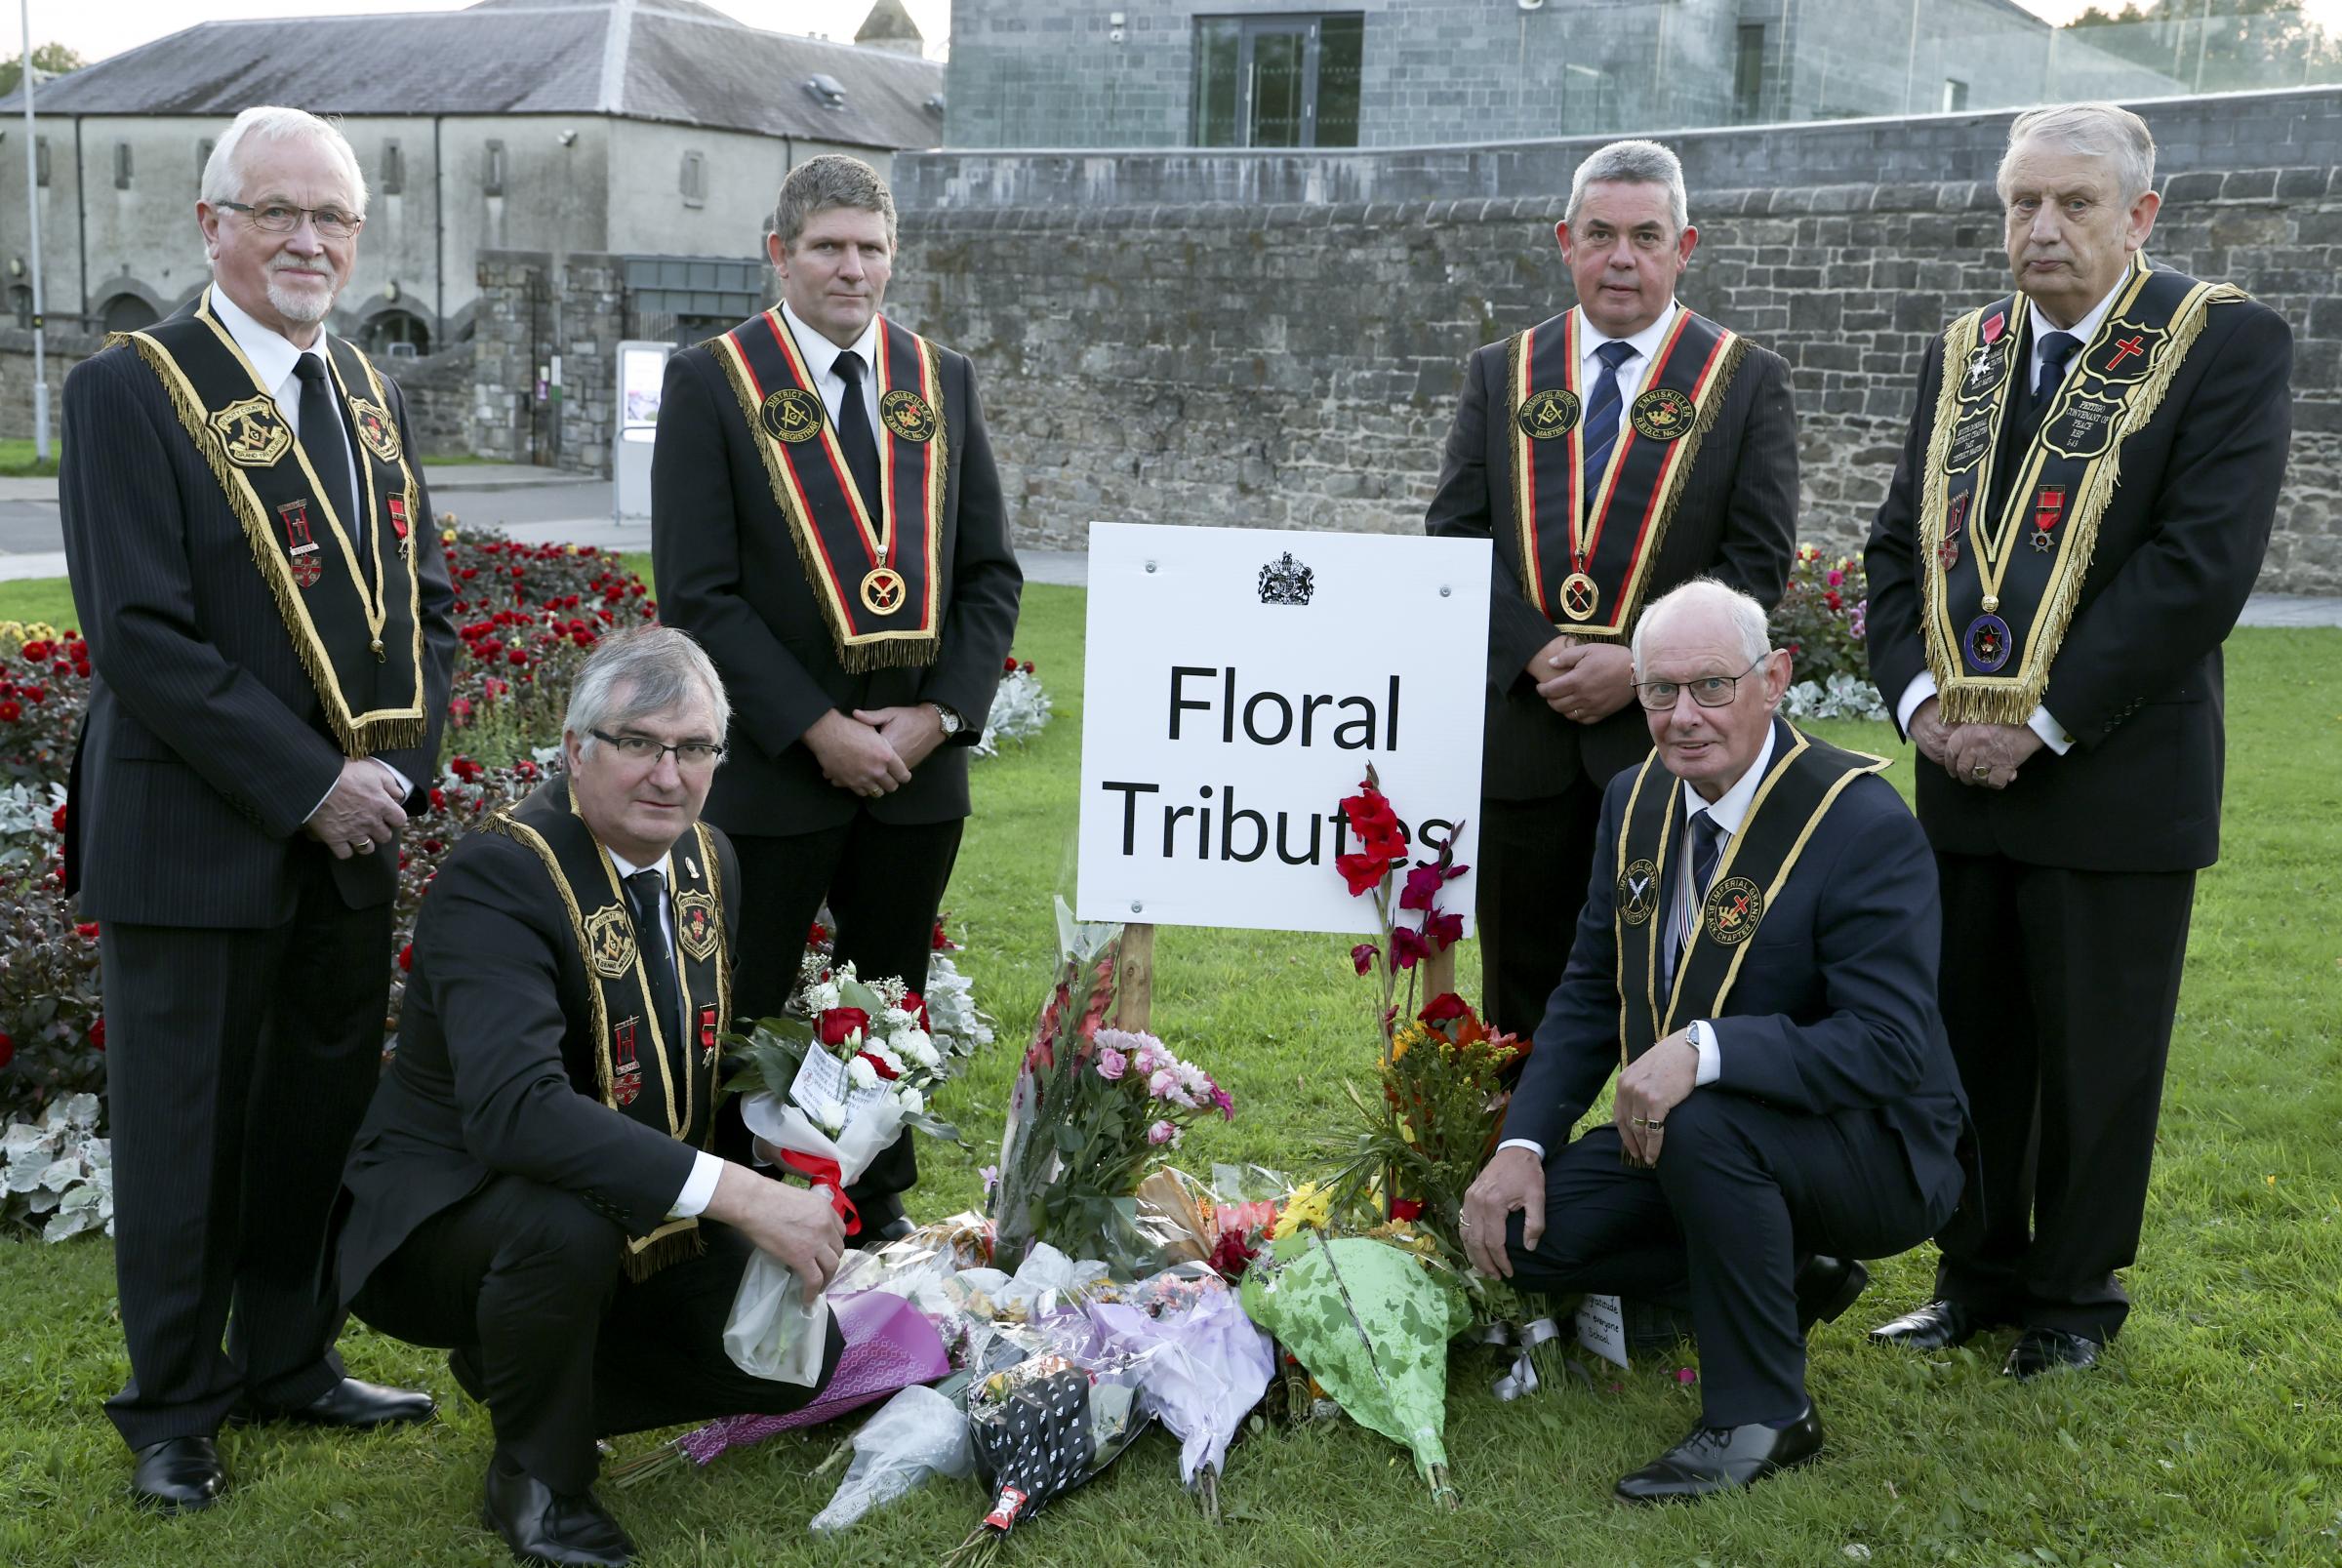 Officers of Co.Fermanagh Royal Black Institution, who layed flowers in memory of Her Majesty Queen Elizabeth II at Enniskillen Castle are, front kneeling from left, Sir Knight, Tom Elliott, County Grand Master and Robert Dane. Back from left are Sir